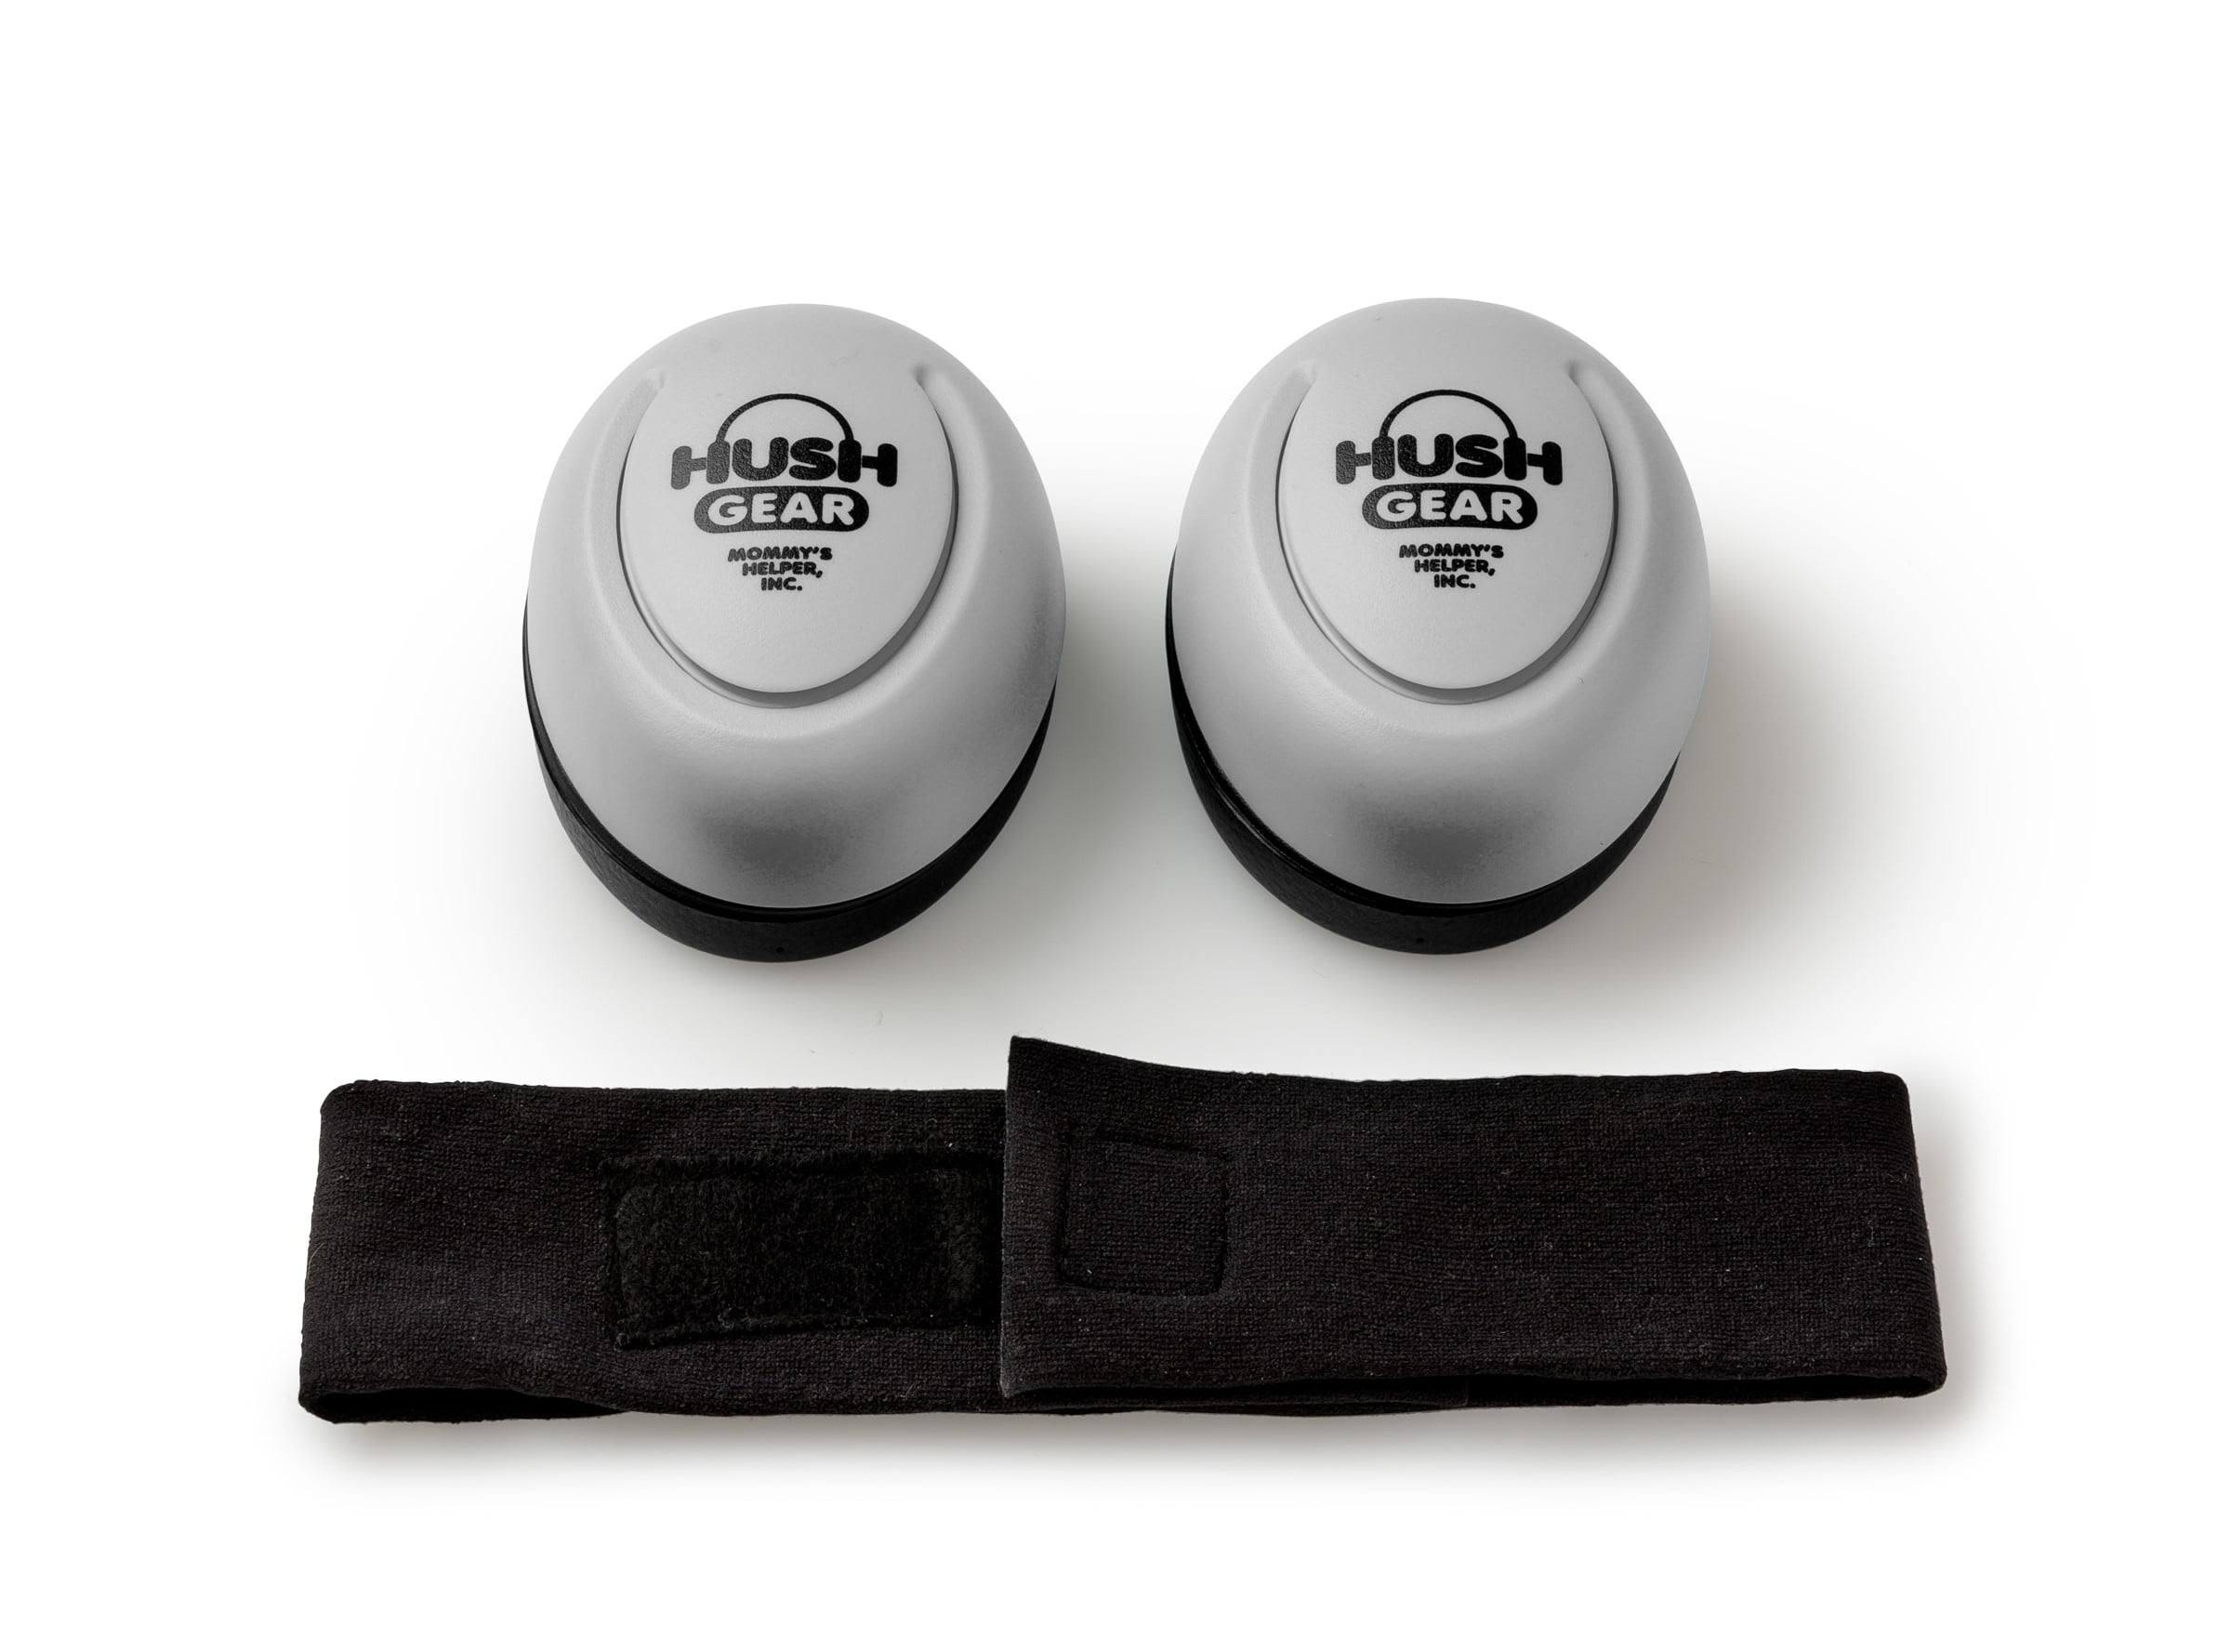 Proven HushGear Infant Noise-Cancelling Headphones for Safe, Protected Ears | Image